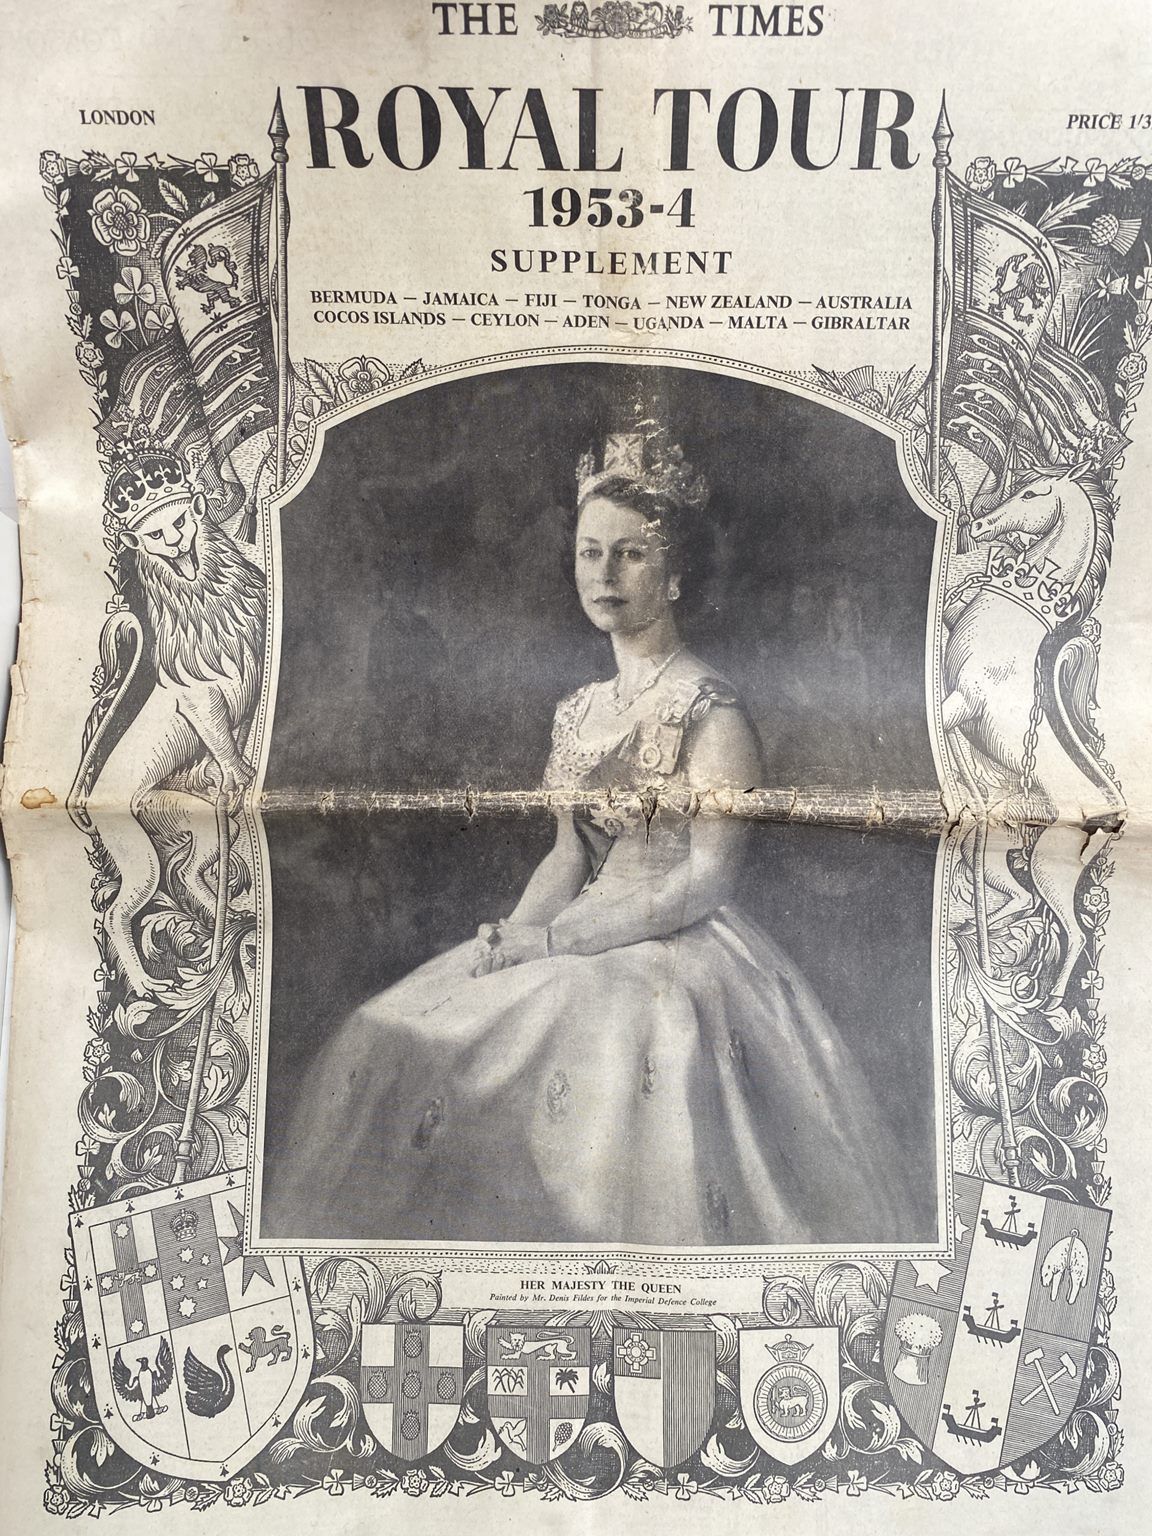 OLD NEWSPAPER: The Times - Royal Tour Supplement 1953-1954